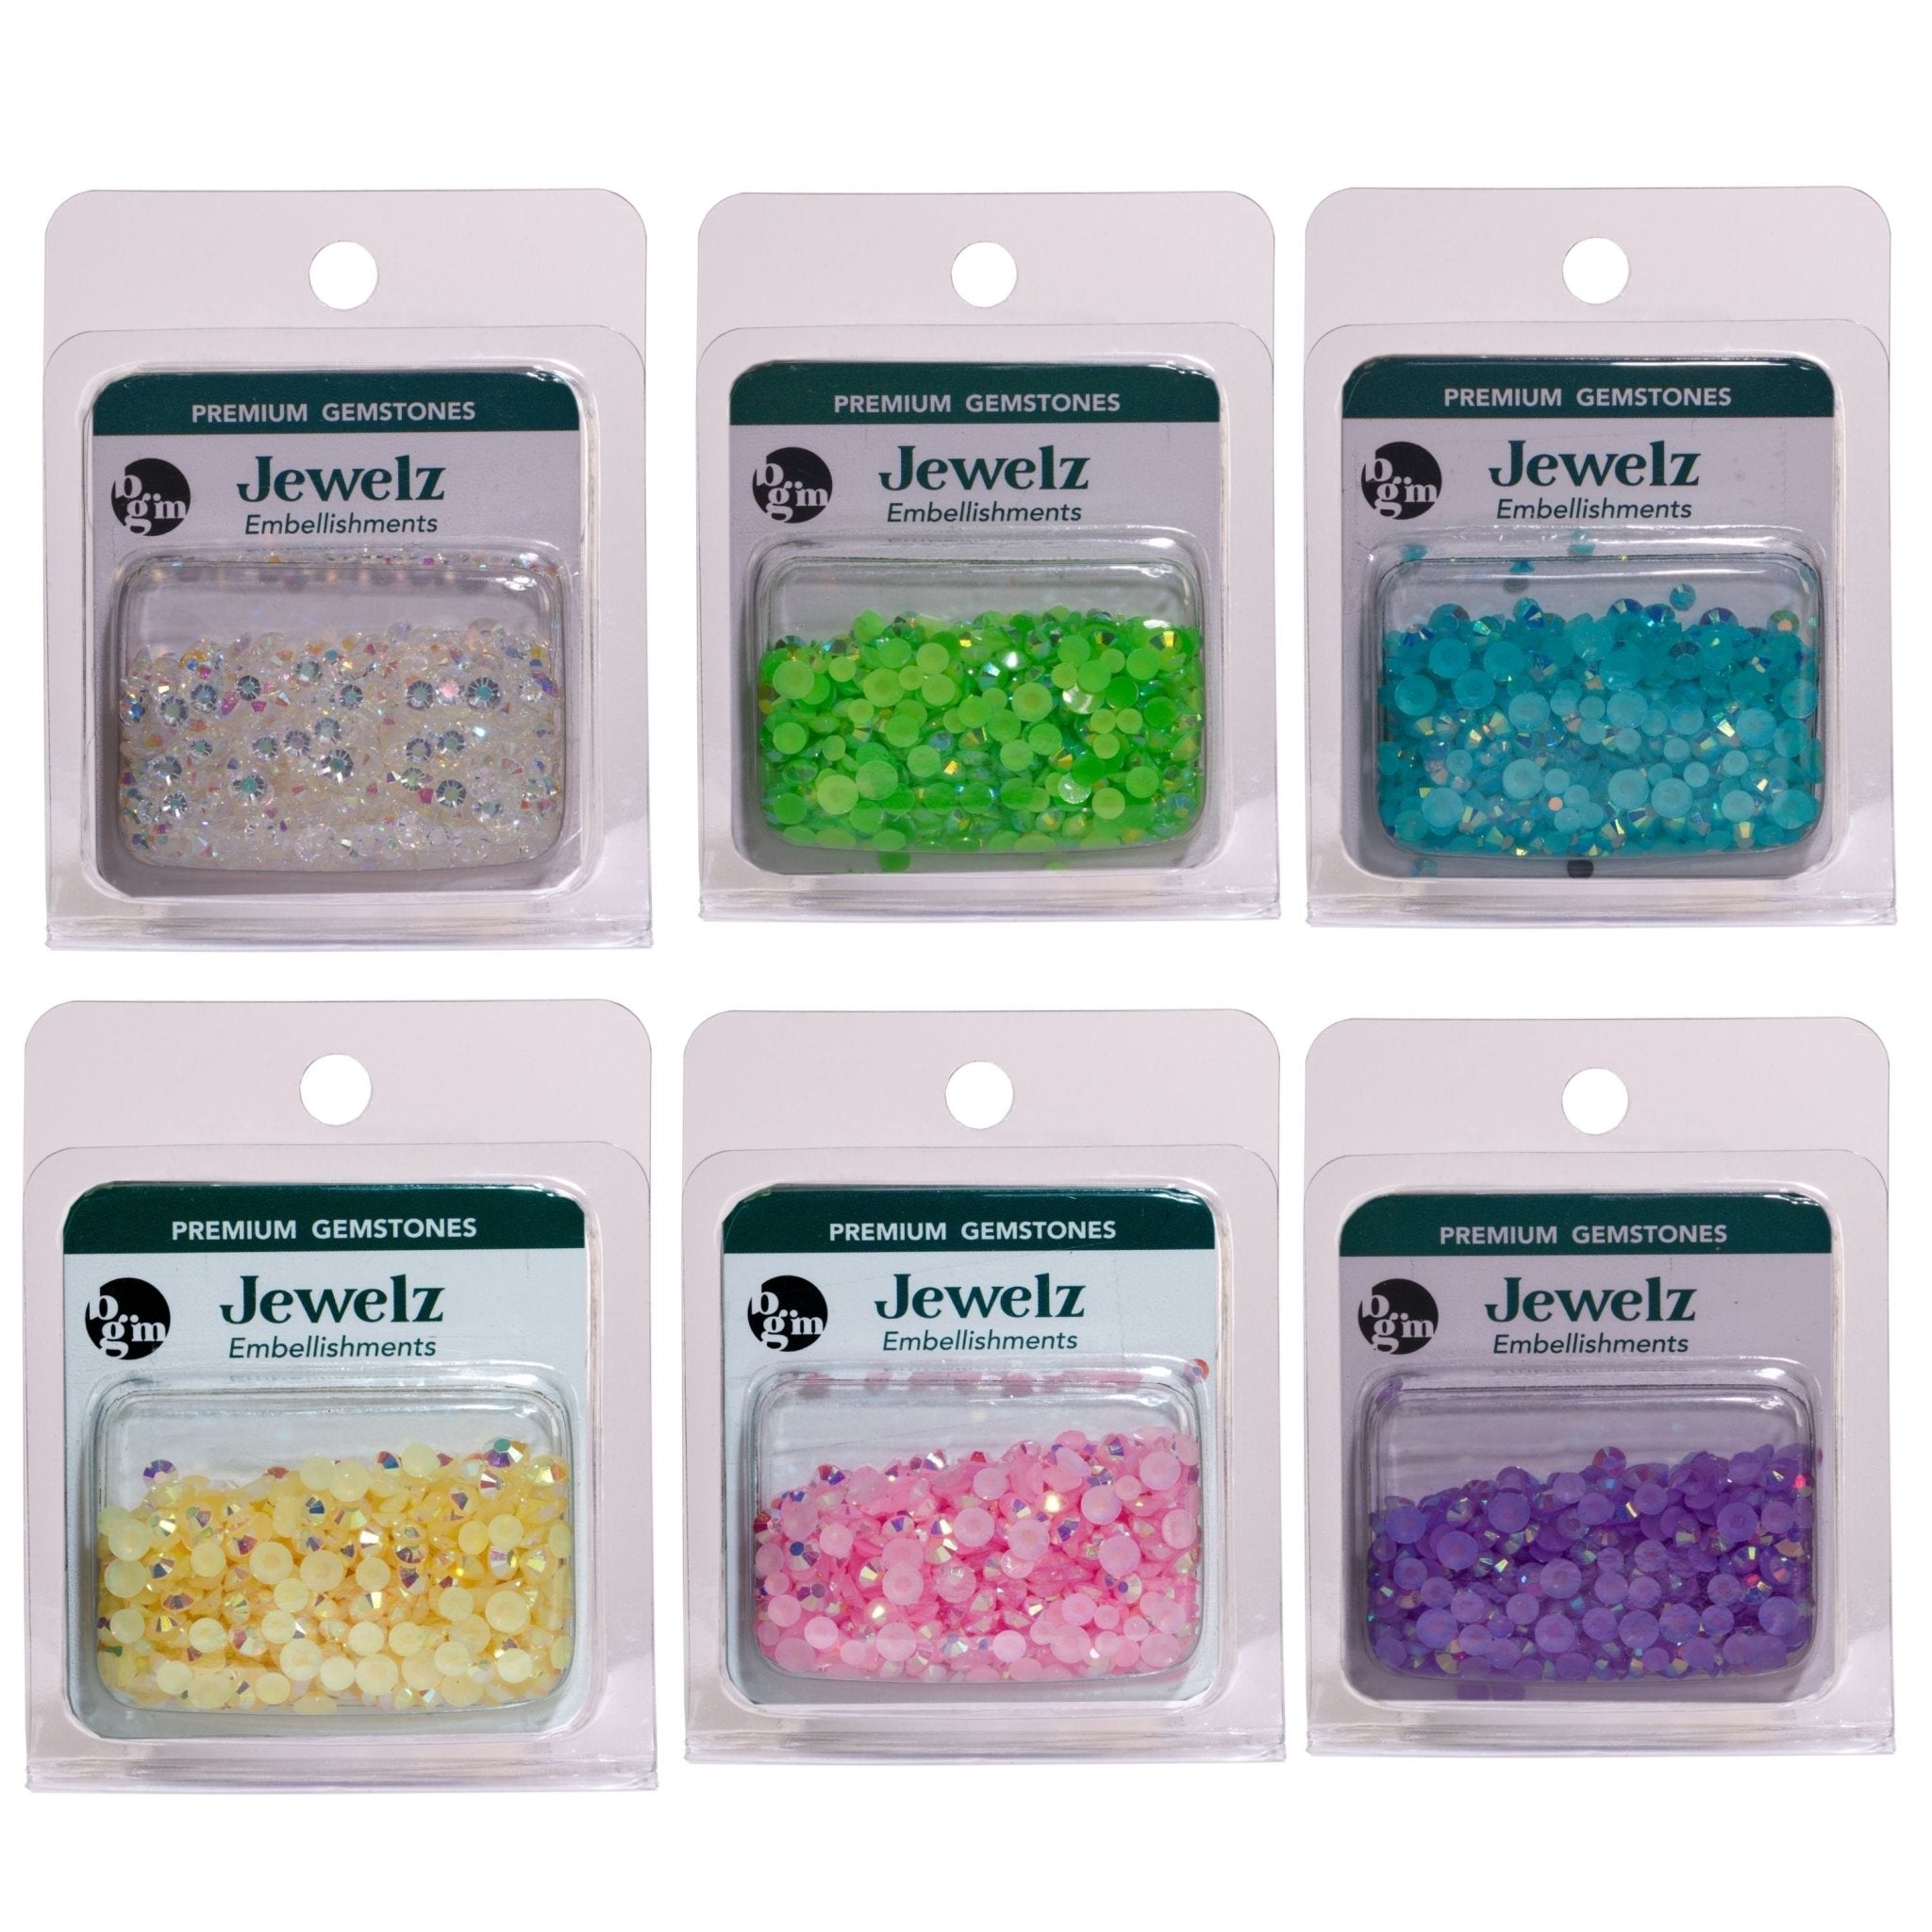 Flat Back Jewelz in Iridescent Gemstone Colors - Over 4000 Rhinestones - Buttons Galore and More